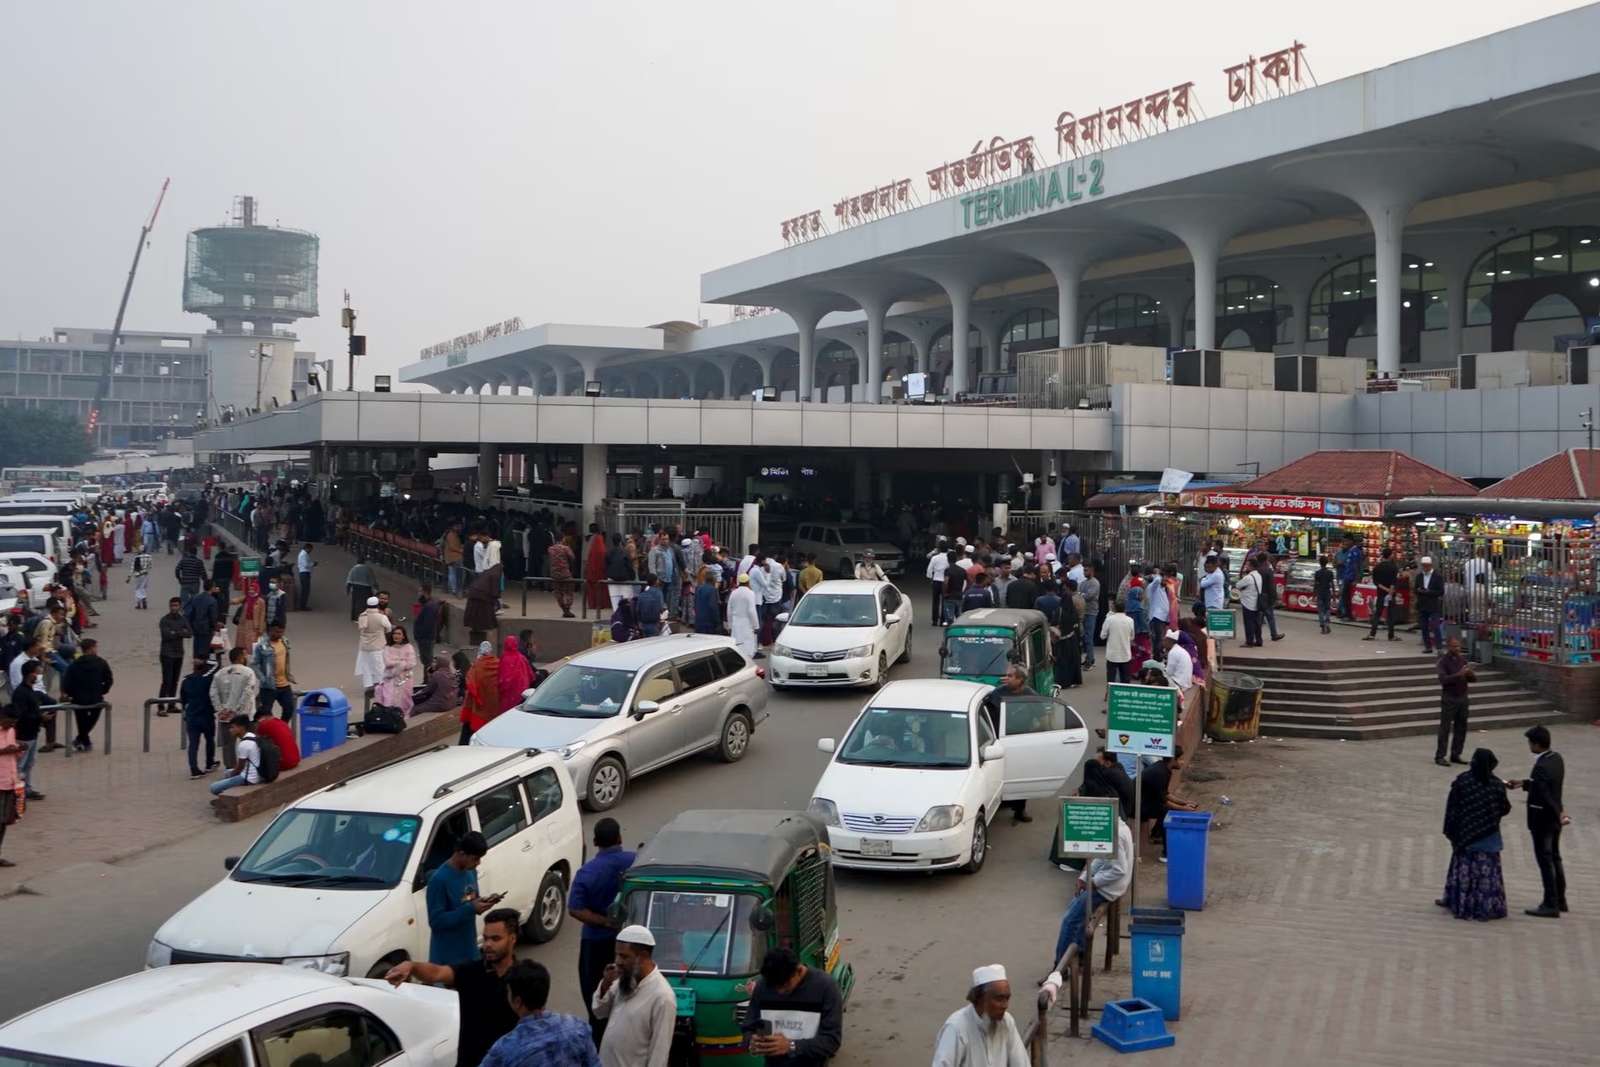 The scene at Dhaka’s international airport, where more and more deported migrants are now found among the business travellers and reunited families